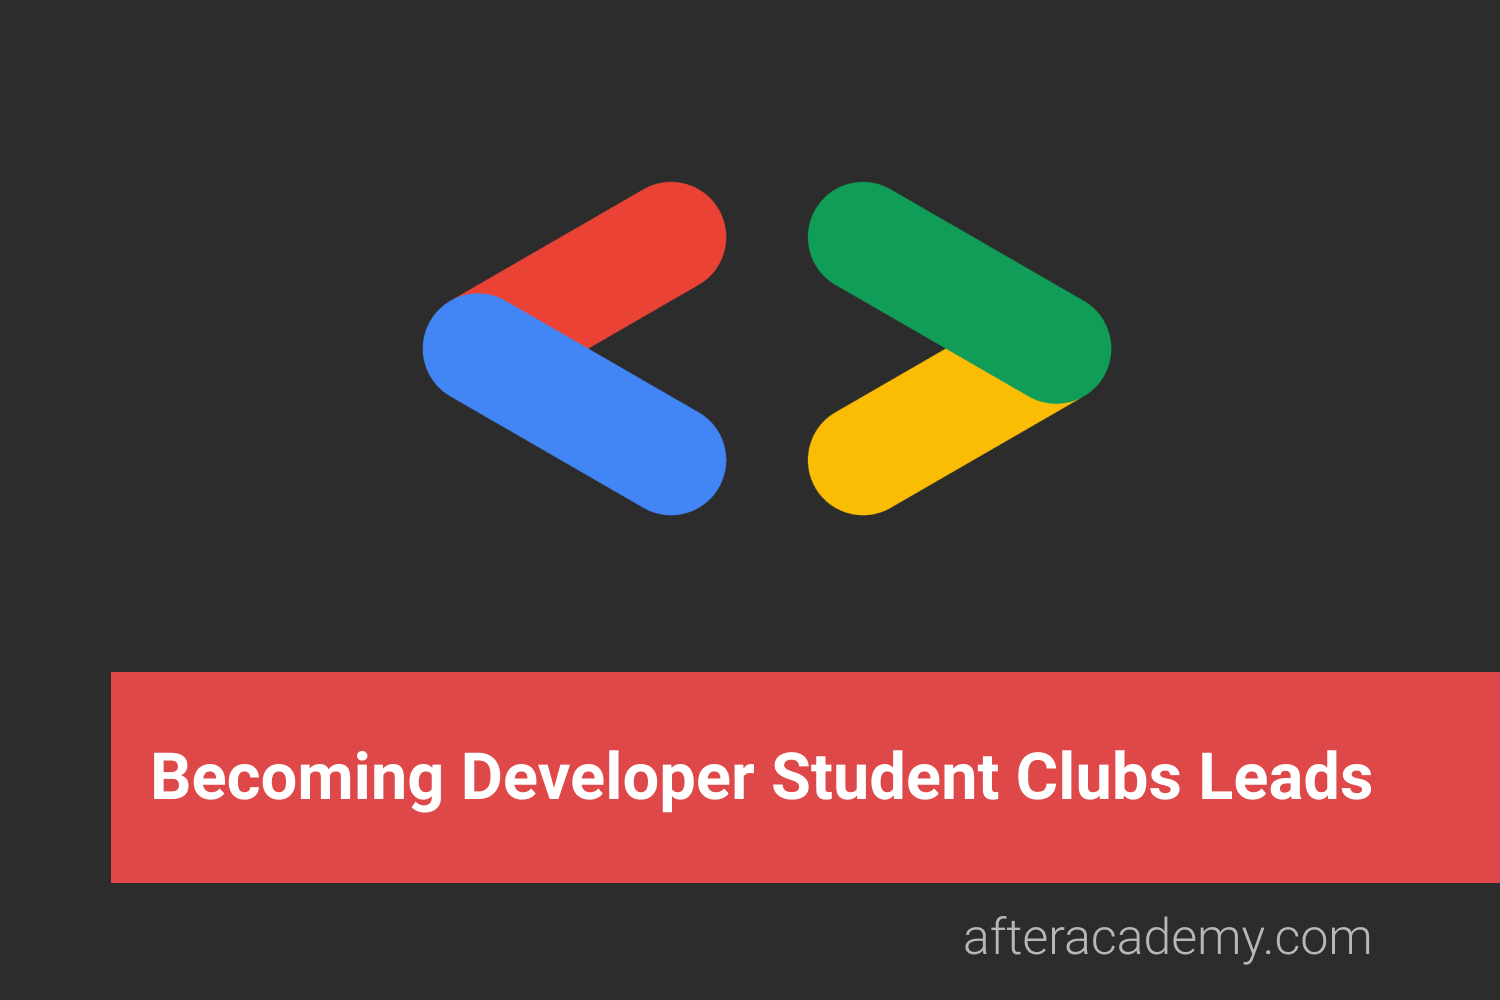 How to become Developer Student Clubs Leads?